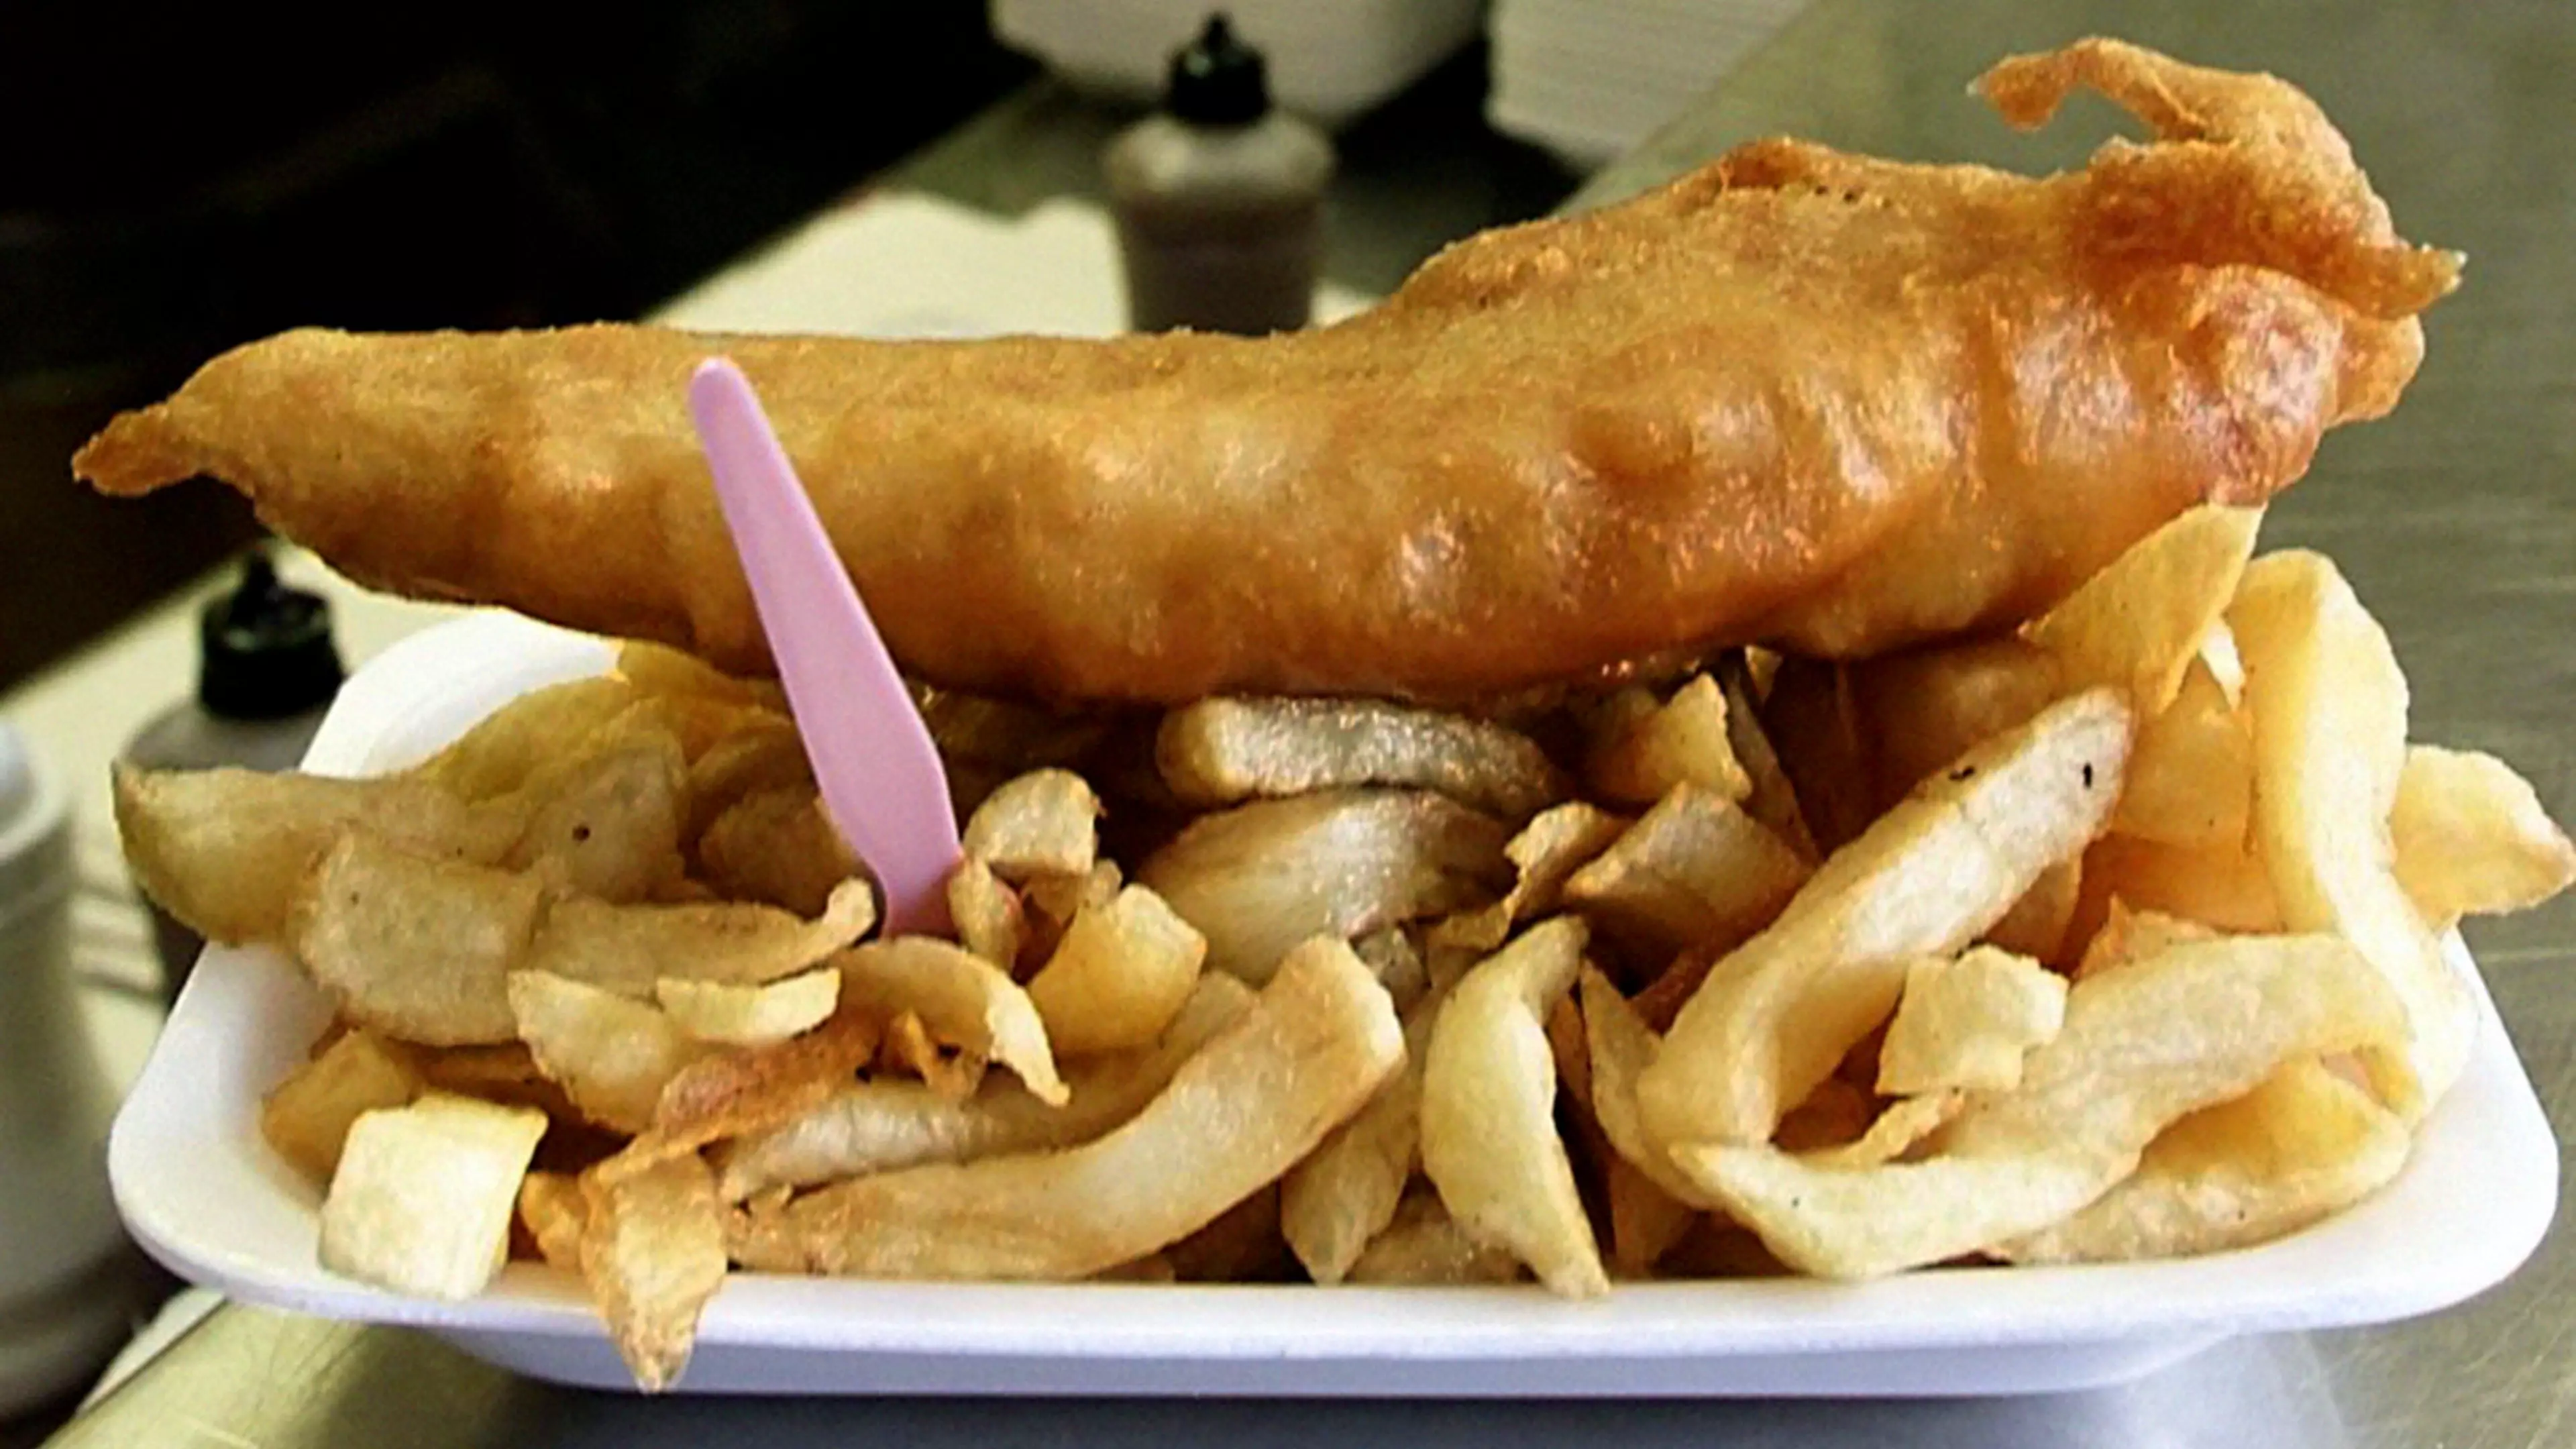 North Vs South Divide: How Should You Enjoy Your Chippy Tea?